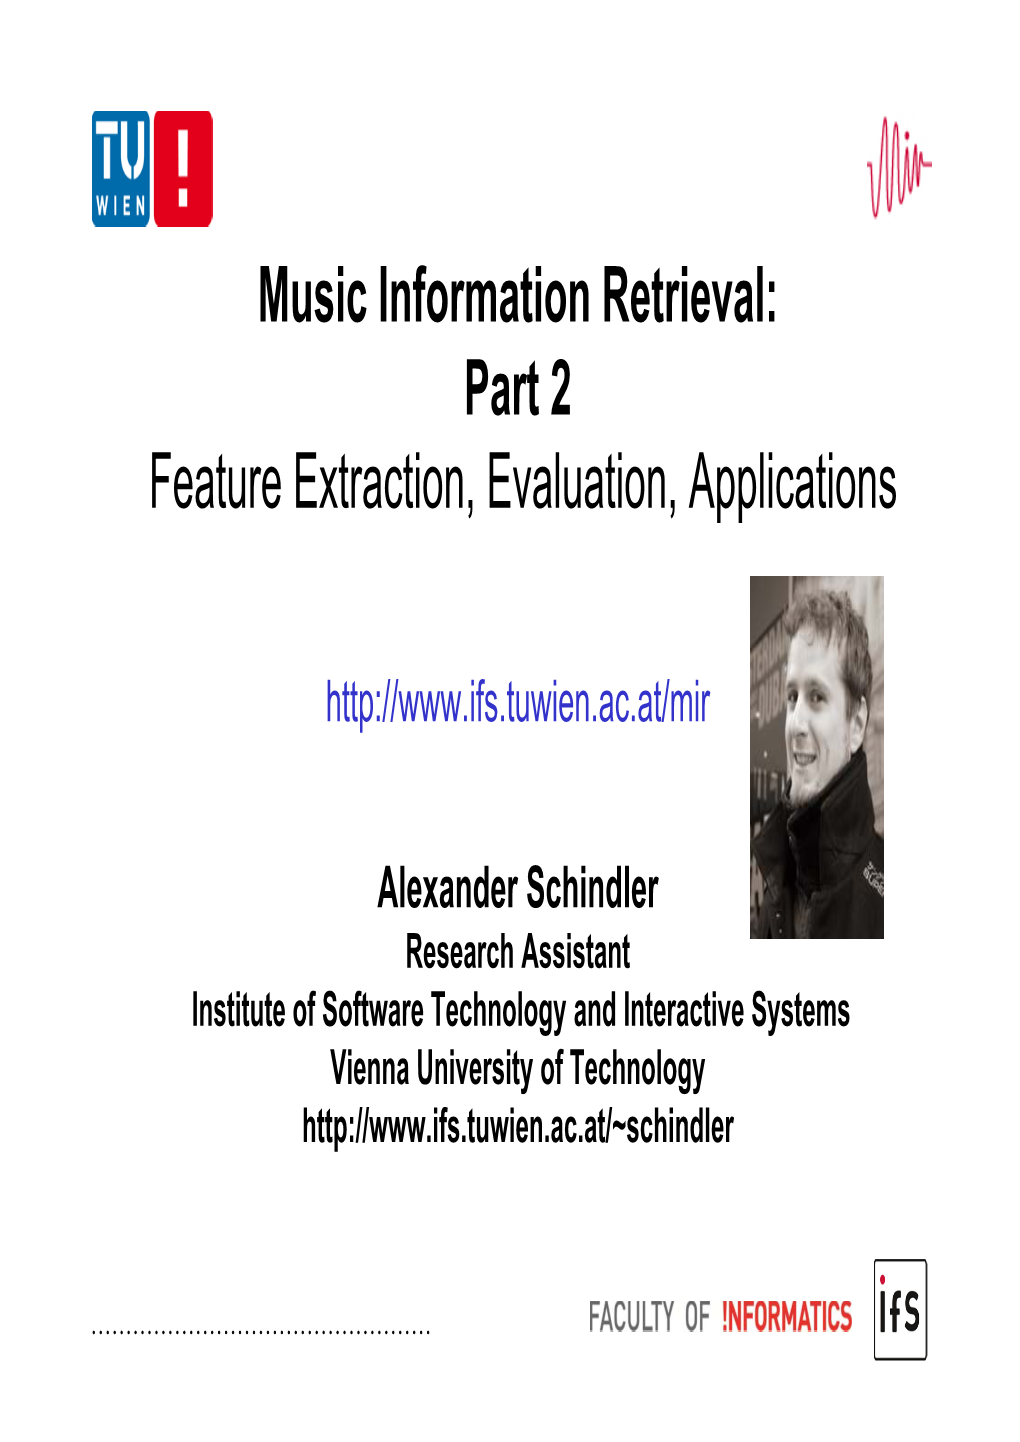 Music Information Retrieval: Part 2 Feature Extraction, Evaluation, Applications